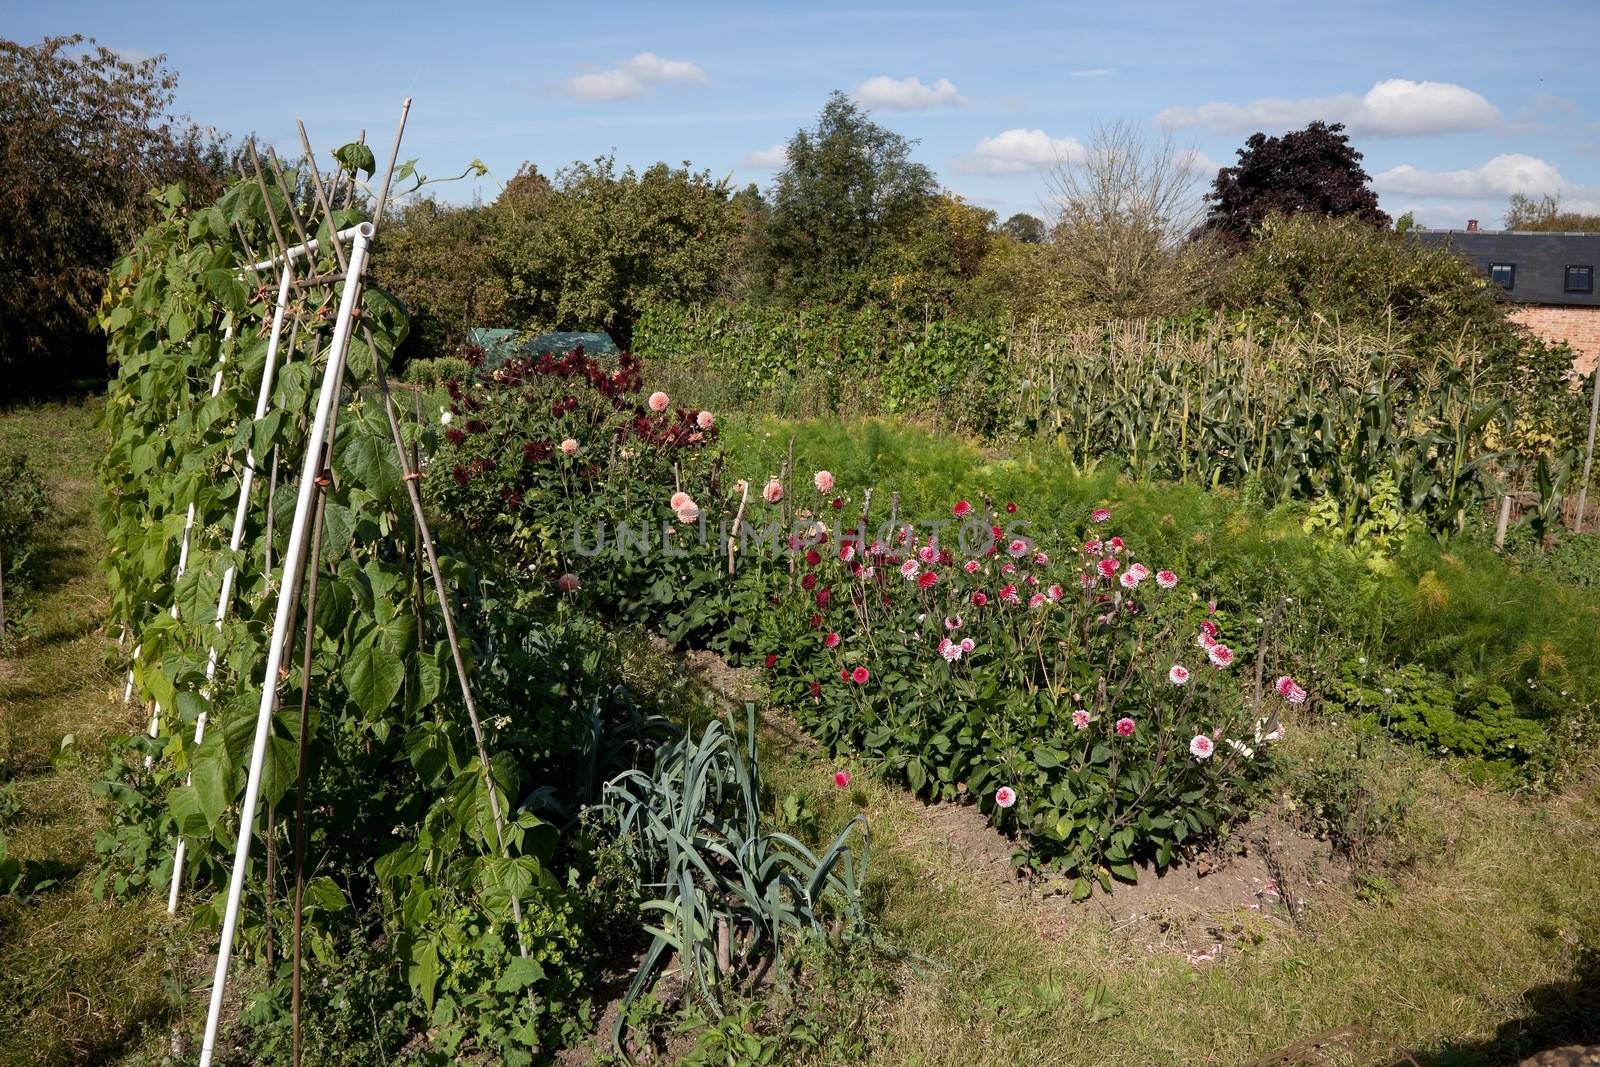 Allotments showing flower and vegetable plots, England.